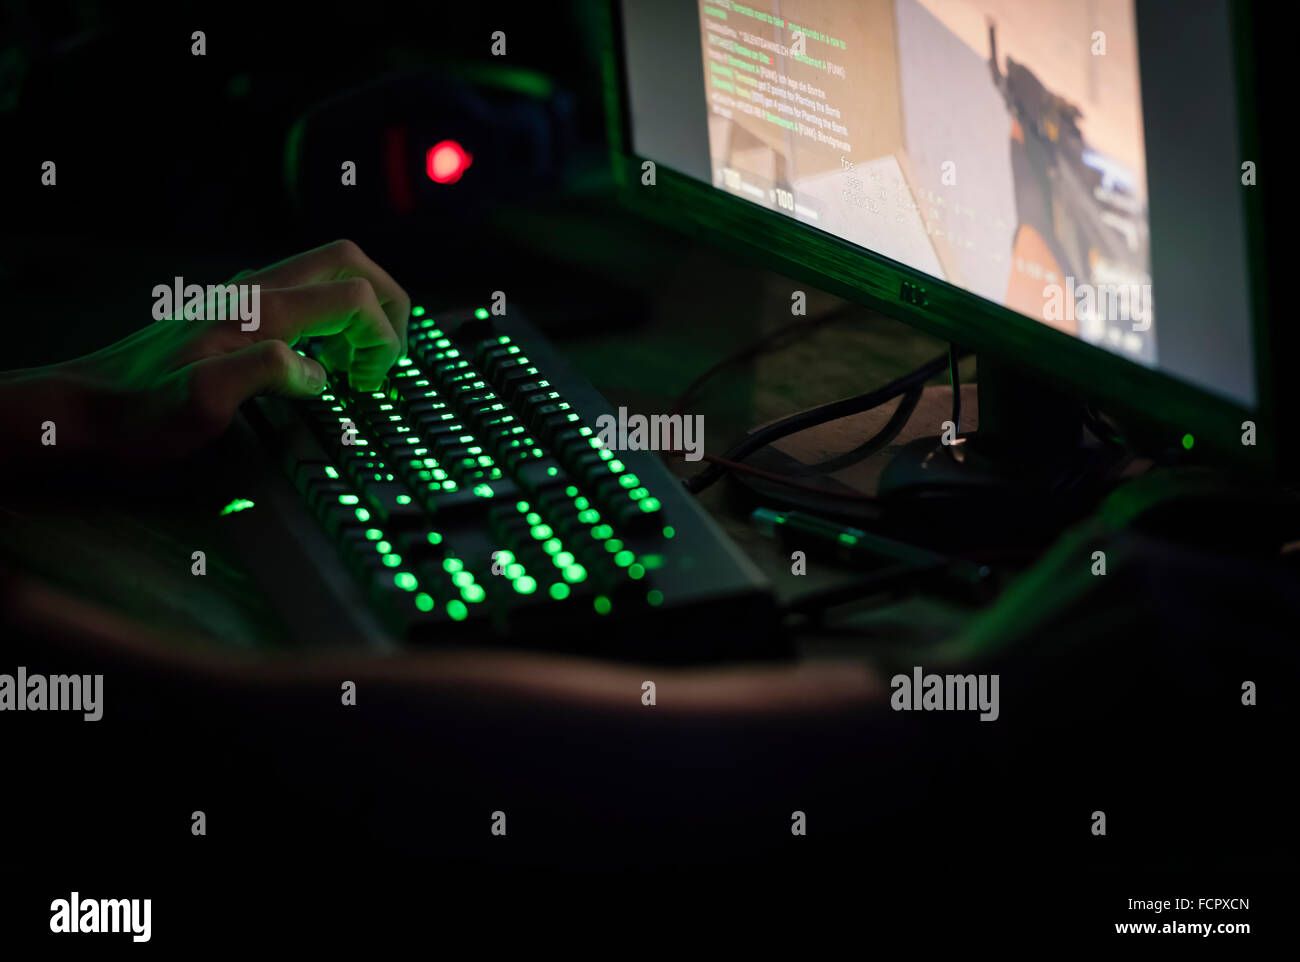 A computer game player is playing the first person shooter 'Counterstrike CS:GO' at a computer game convention. Stock Photo